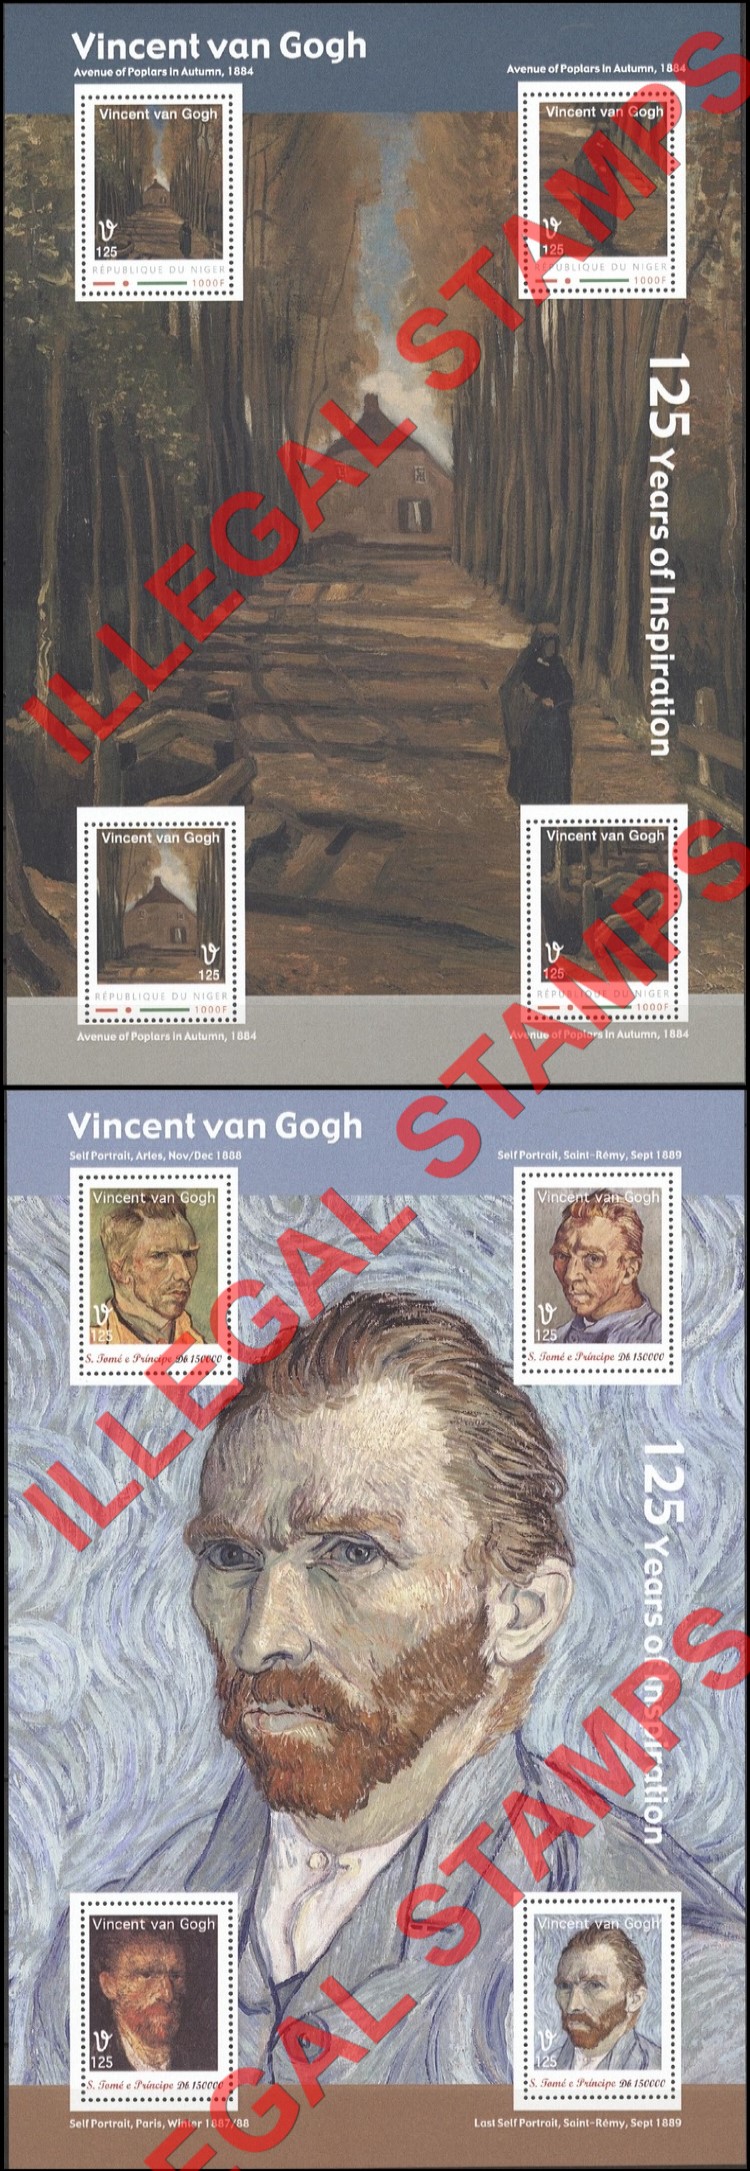 Niger 2012 Paintings by Vincent Van Gogh Illegal Stamp Souvenir Sheets of 4 (Part 2)